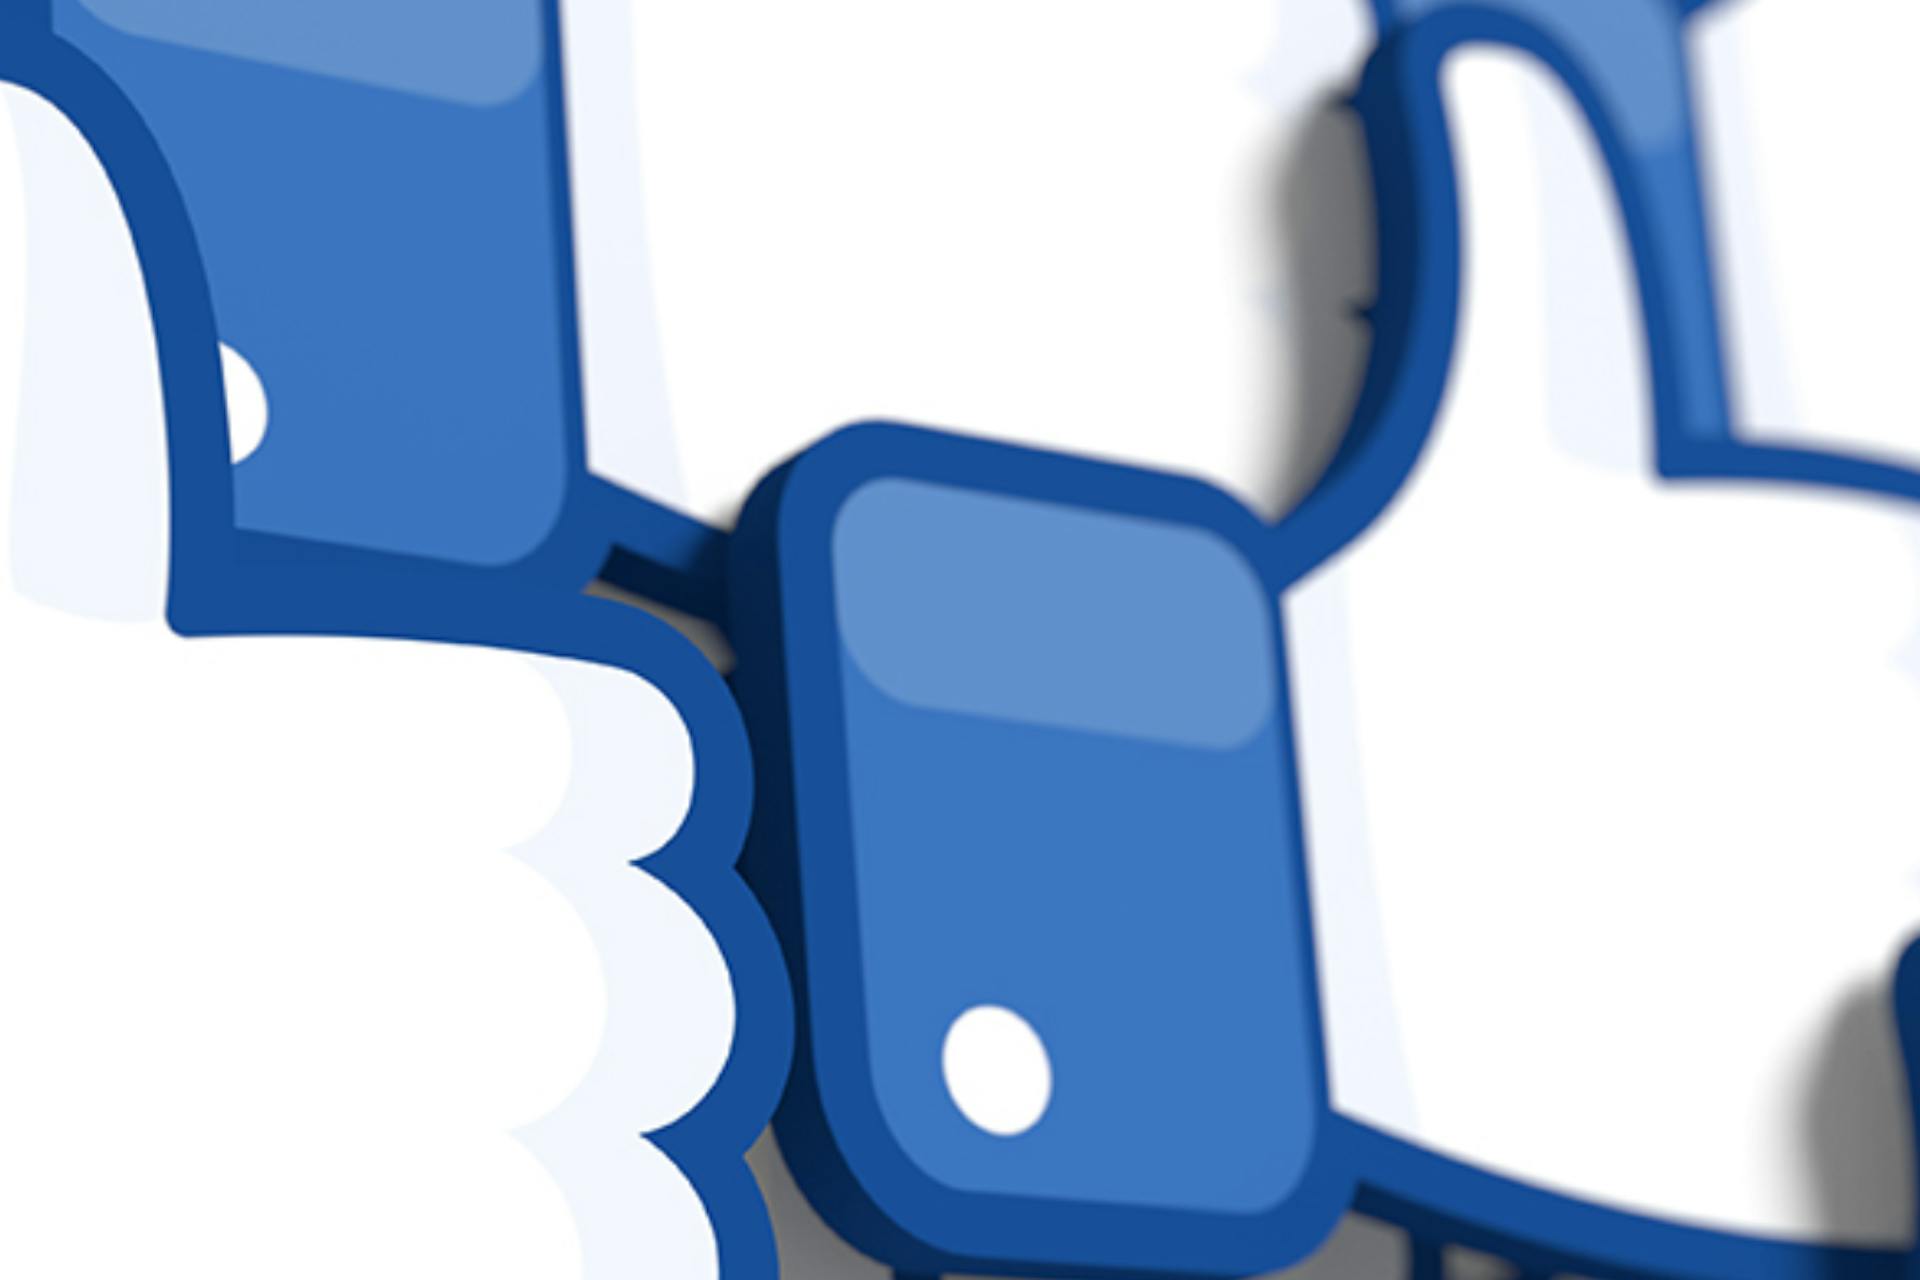 You see a photo of Facebook Like icons as the header image for our blog about Facebook Marketing Tips.